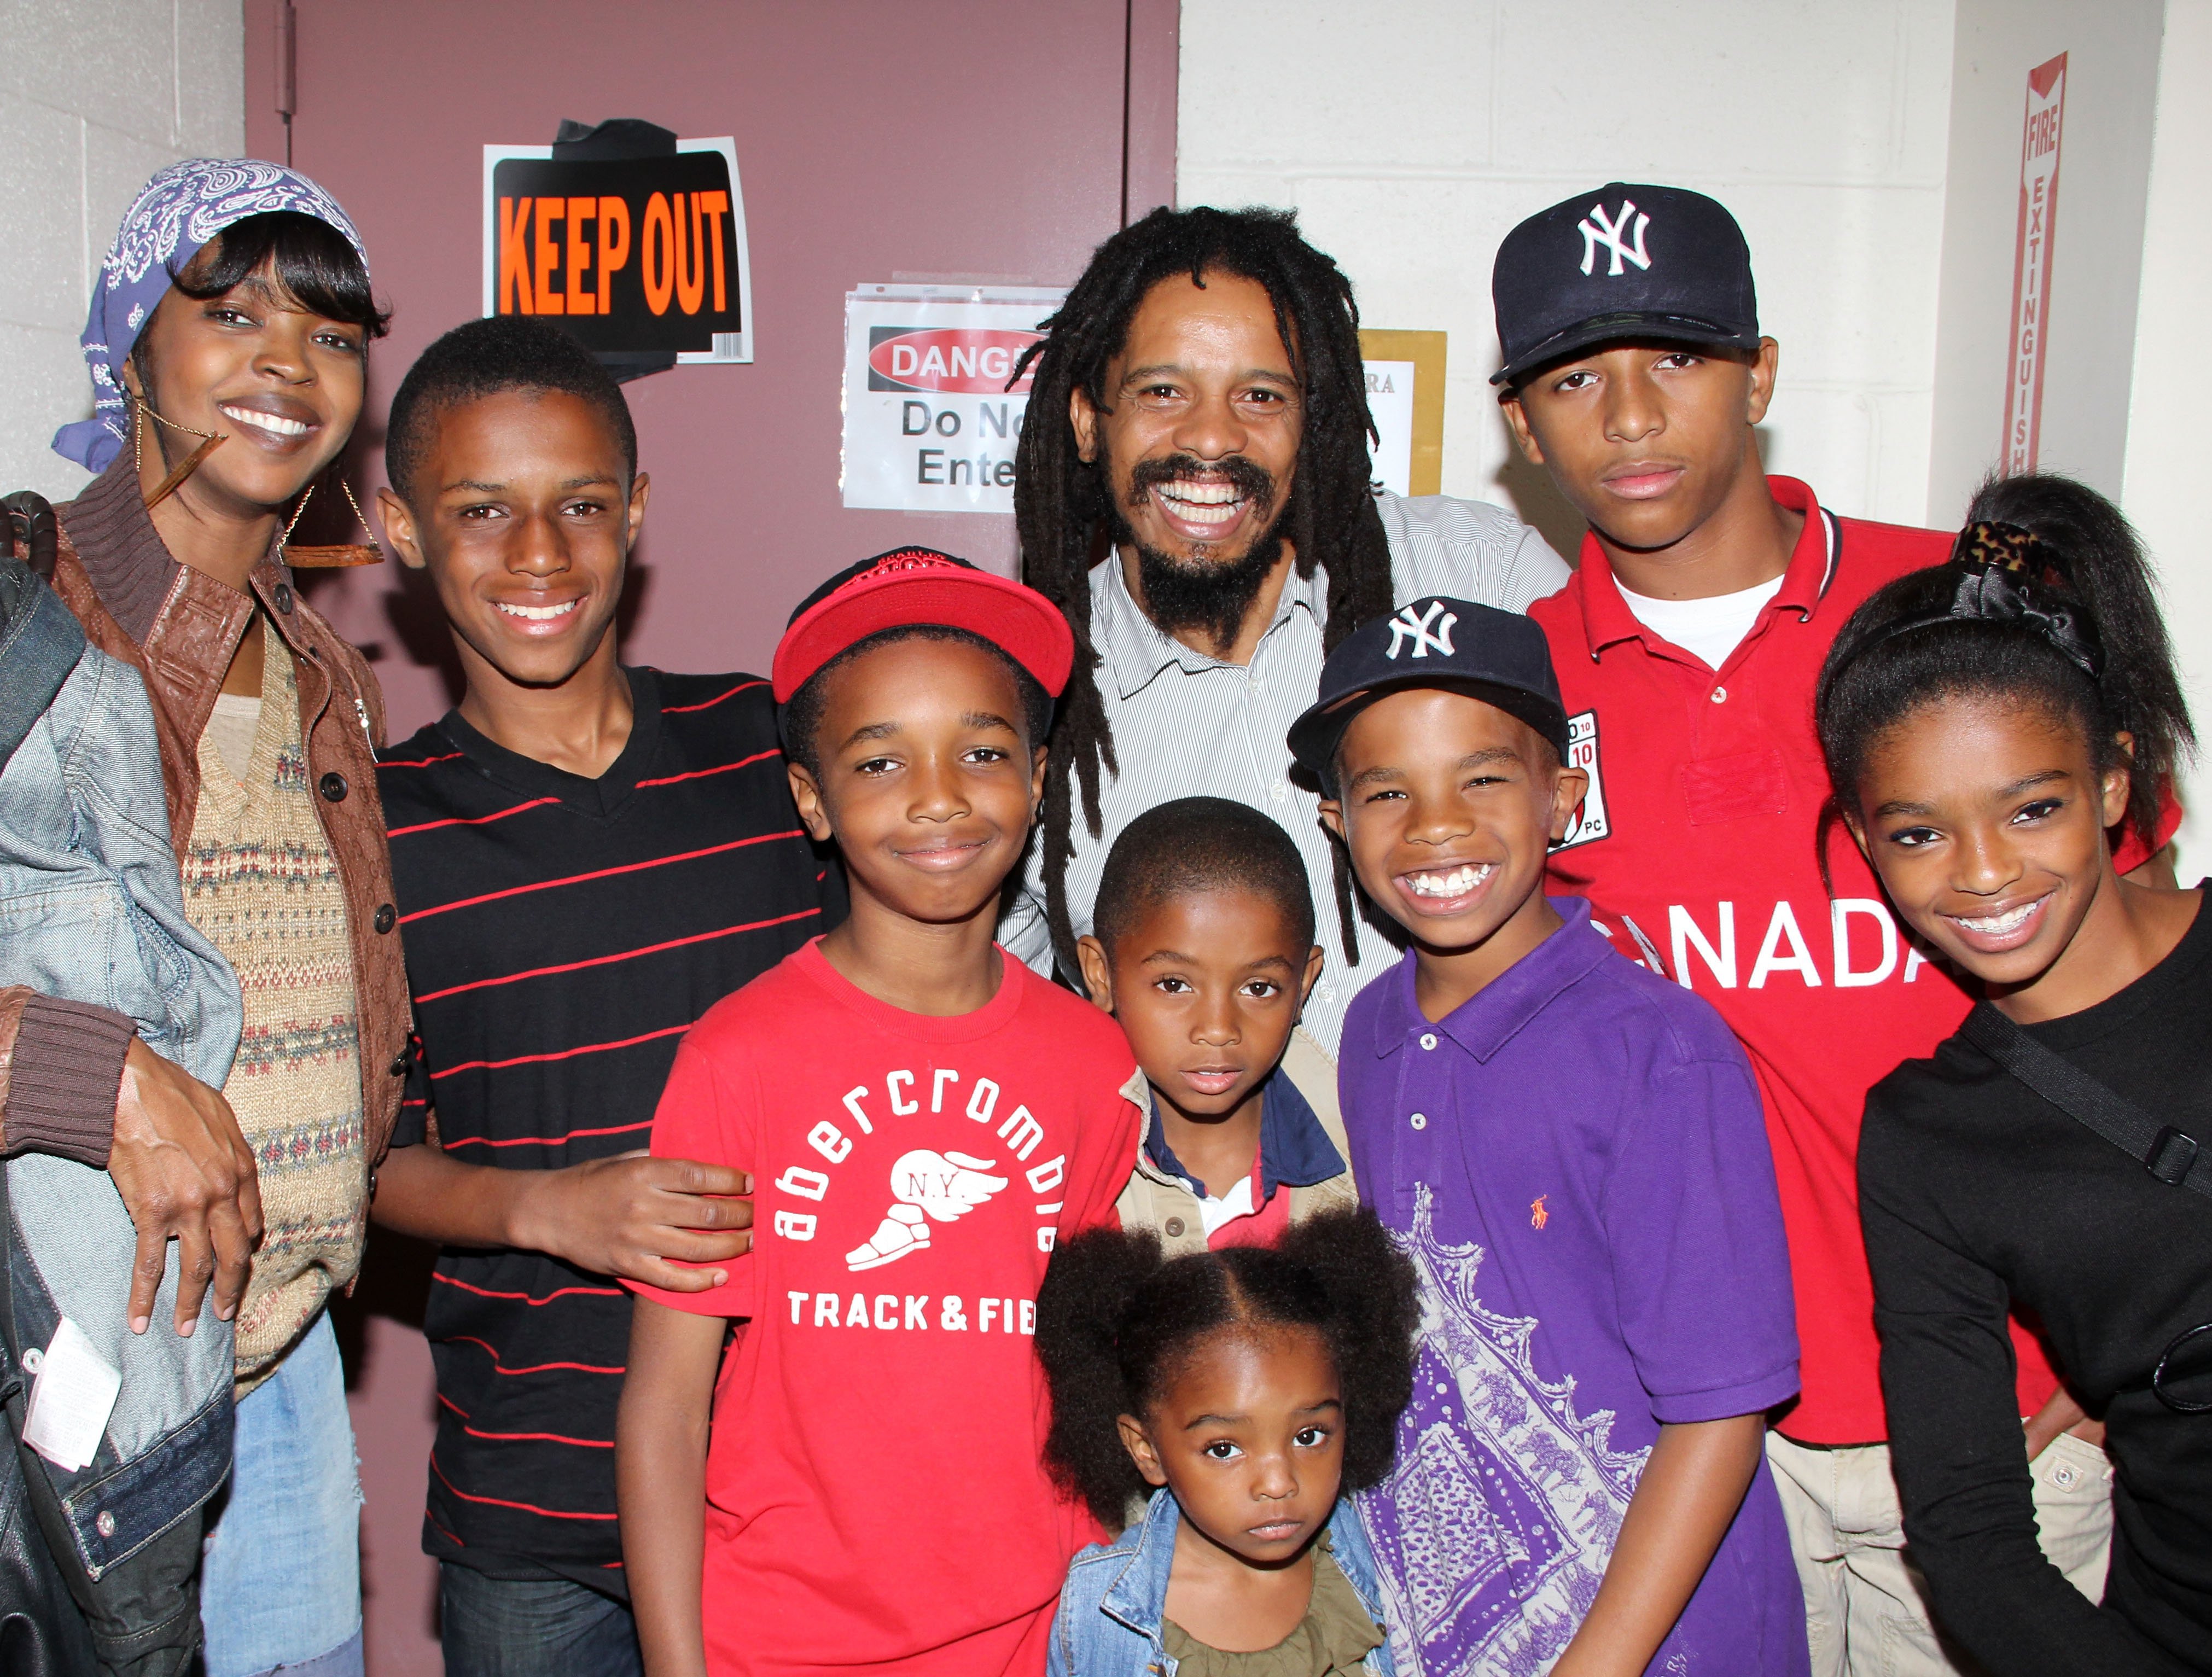 Lauryn Hill, Rohan Marley and family pose backstage at "Spider-Man: Turn Off The Dark" on Broadway at The Foxwoods Theater on June 28, 2011 in New York City. | Source: Getty Images